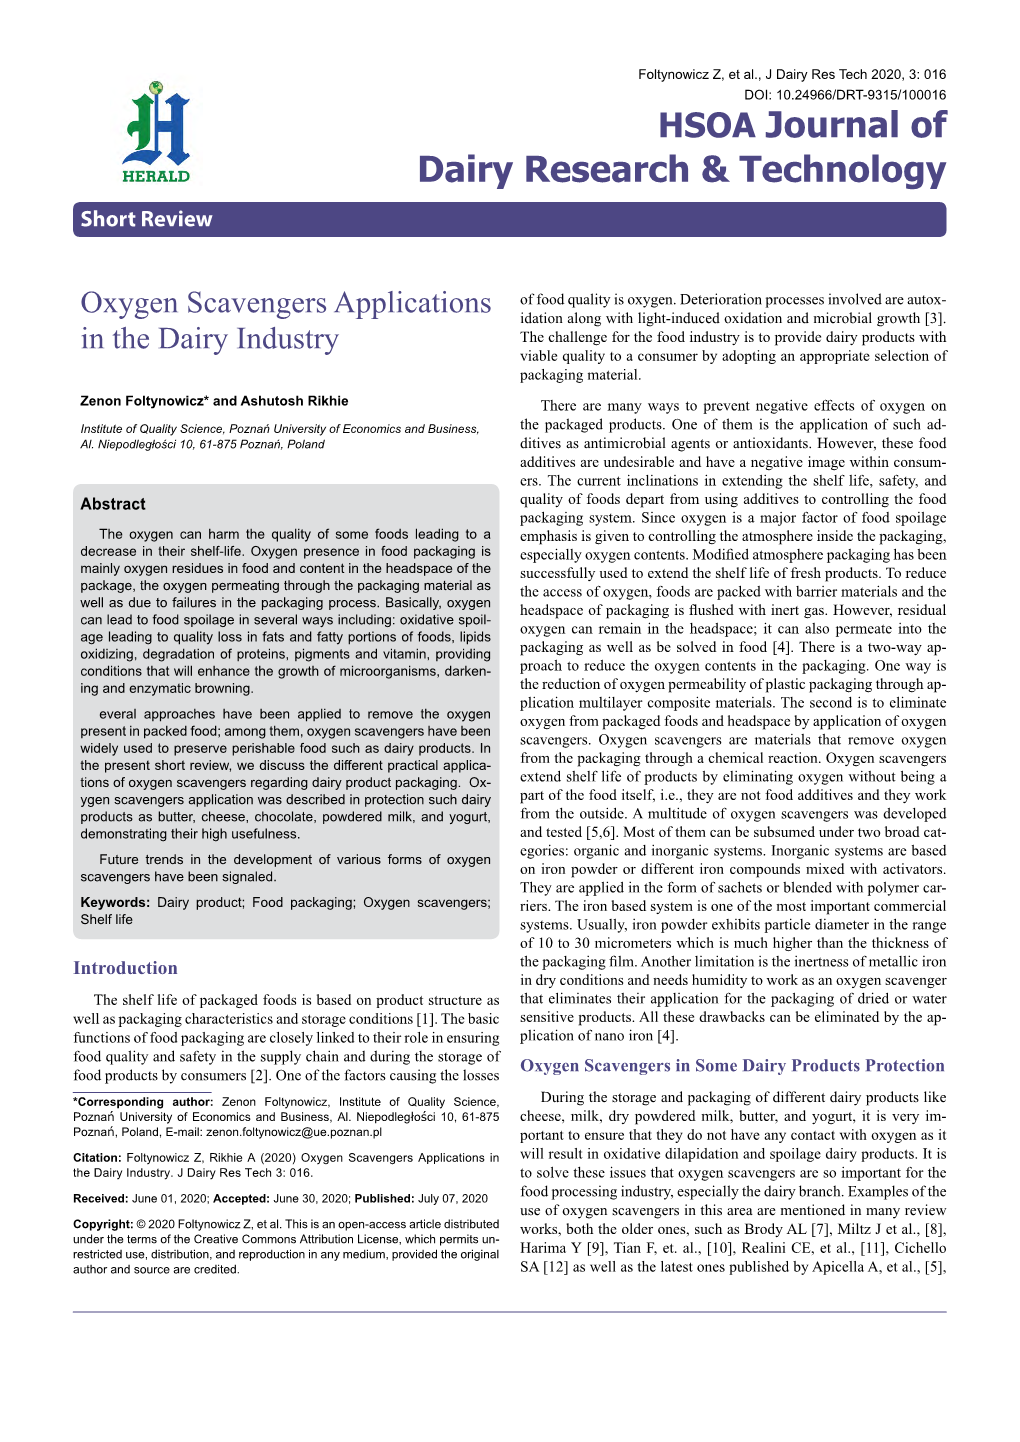 Oxygen Scavengers Applications in the Dairy Industry